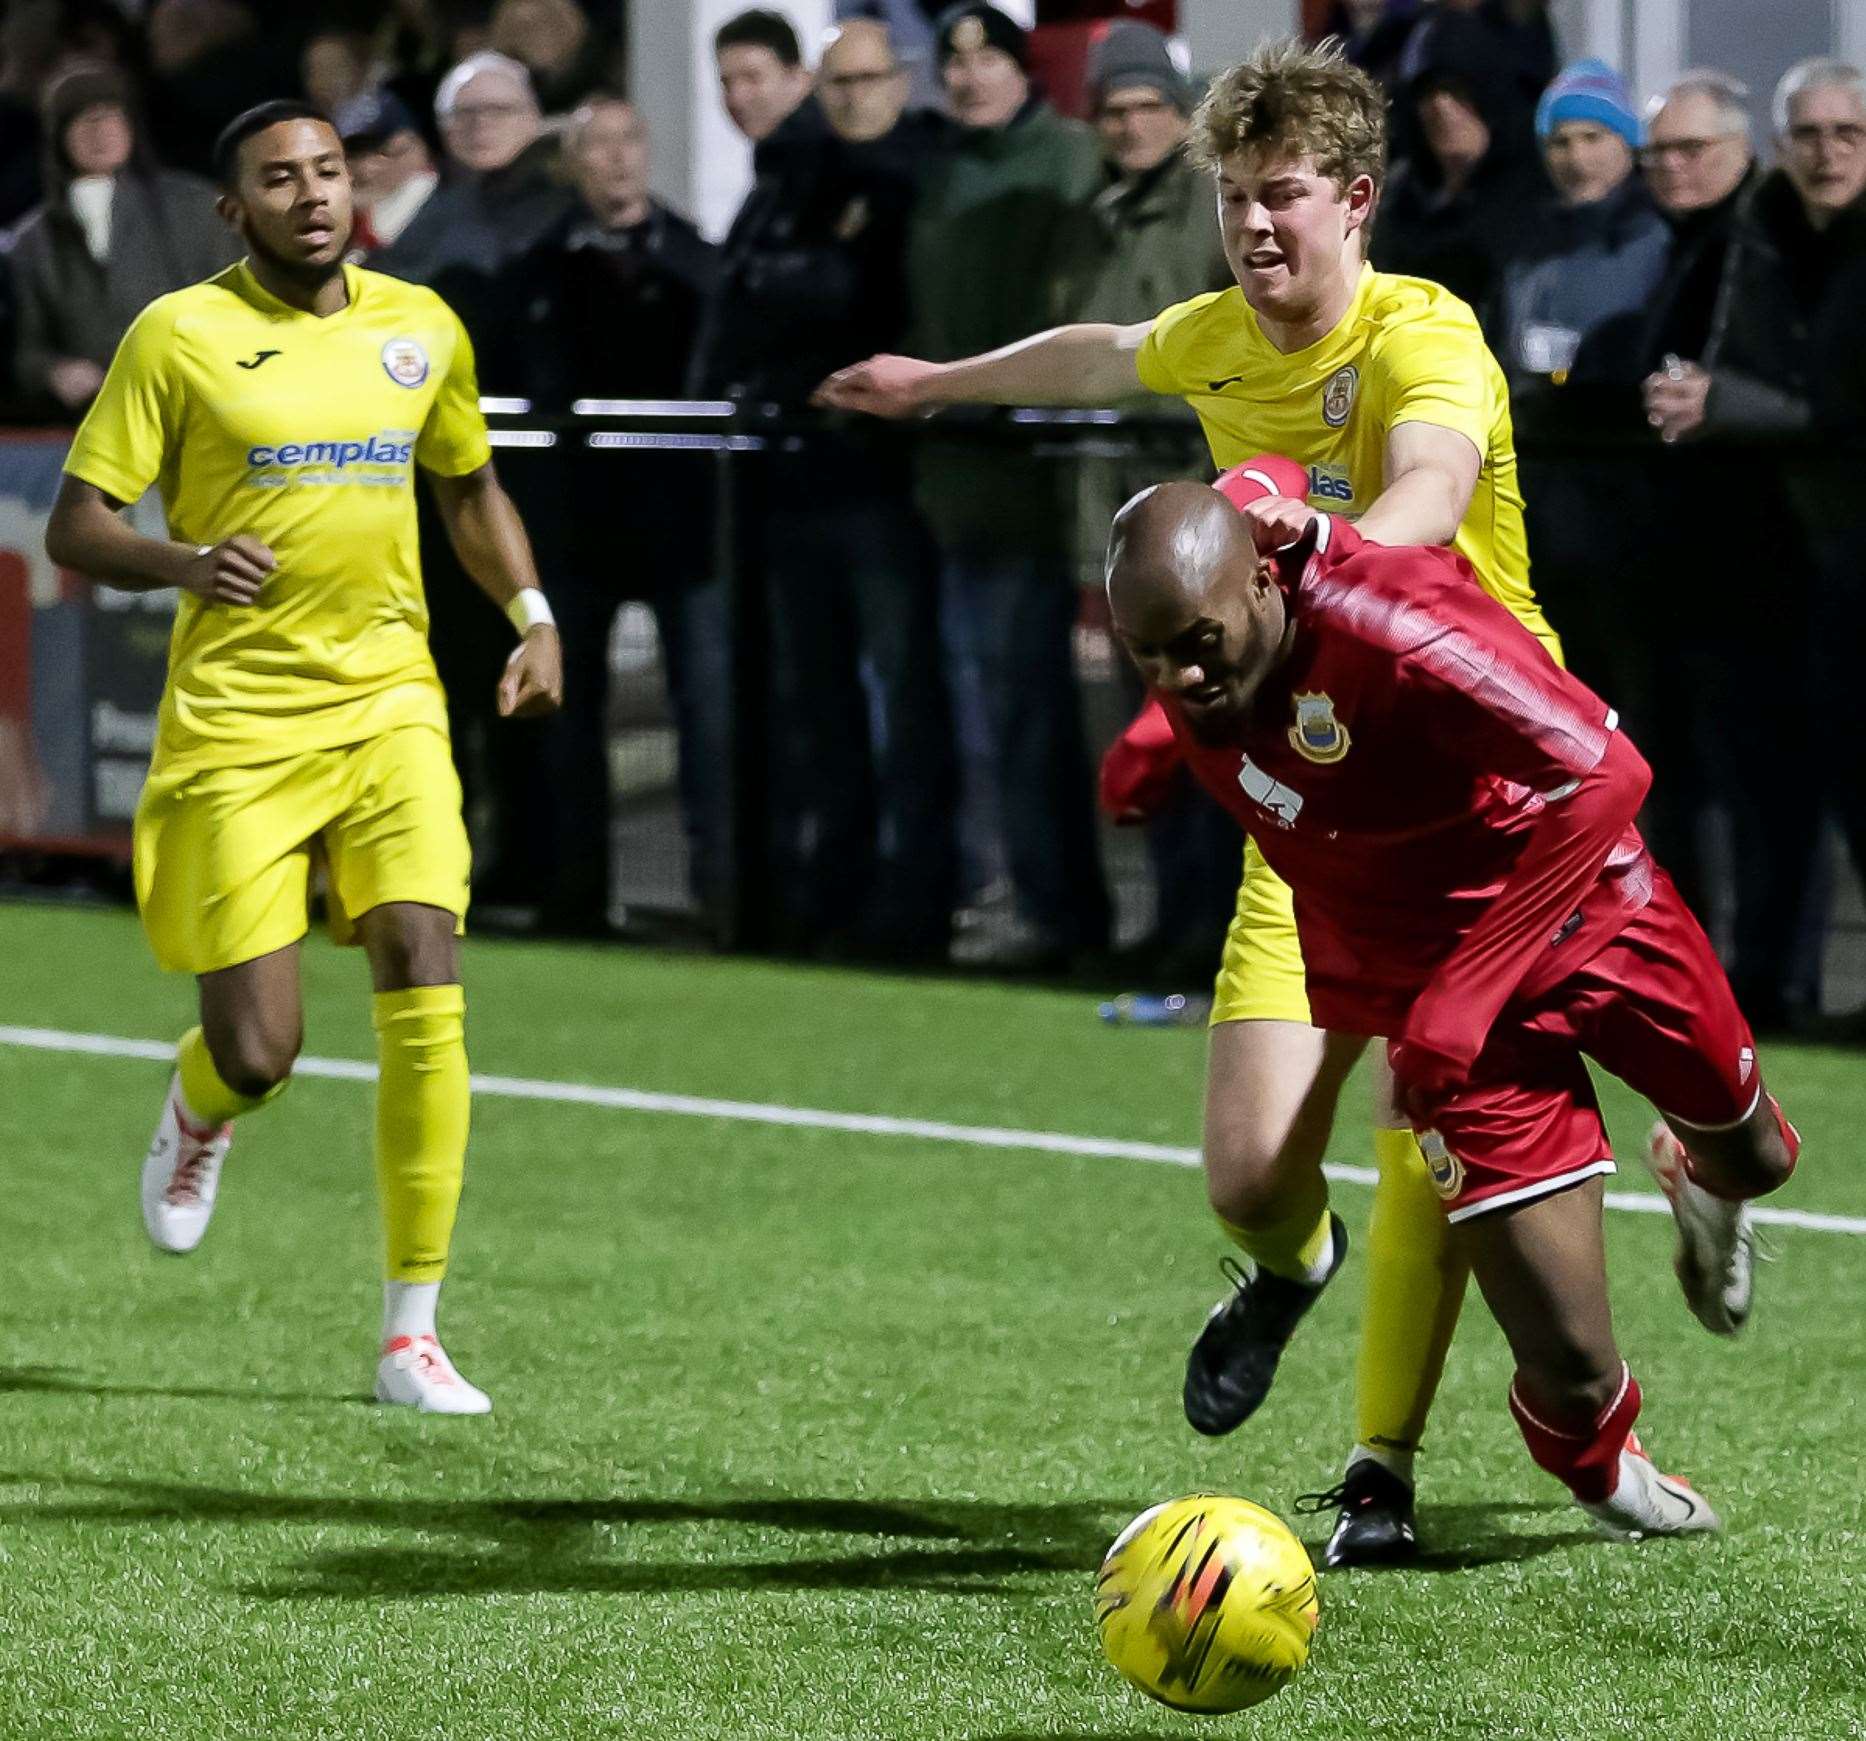 Whitstable home debutant Malachi Hudson is brought down. Picture: Les Biggs